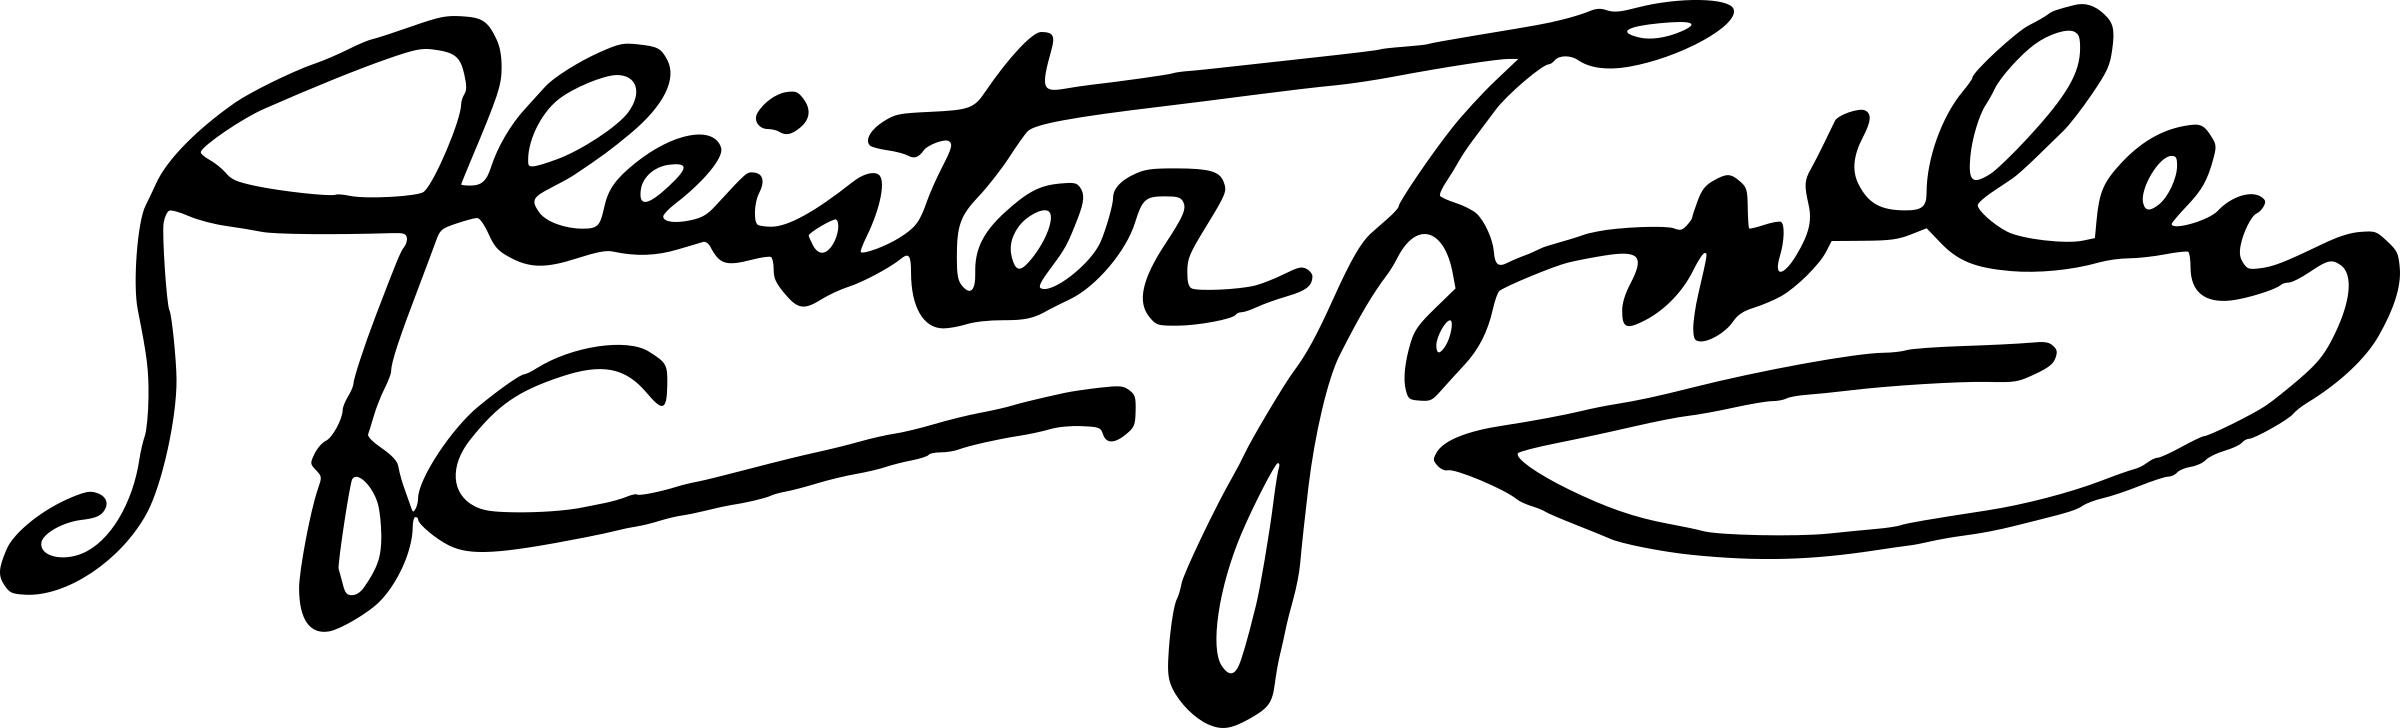 Aleister Crowley Signature png